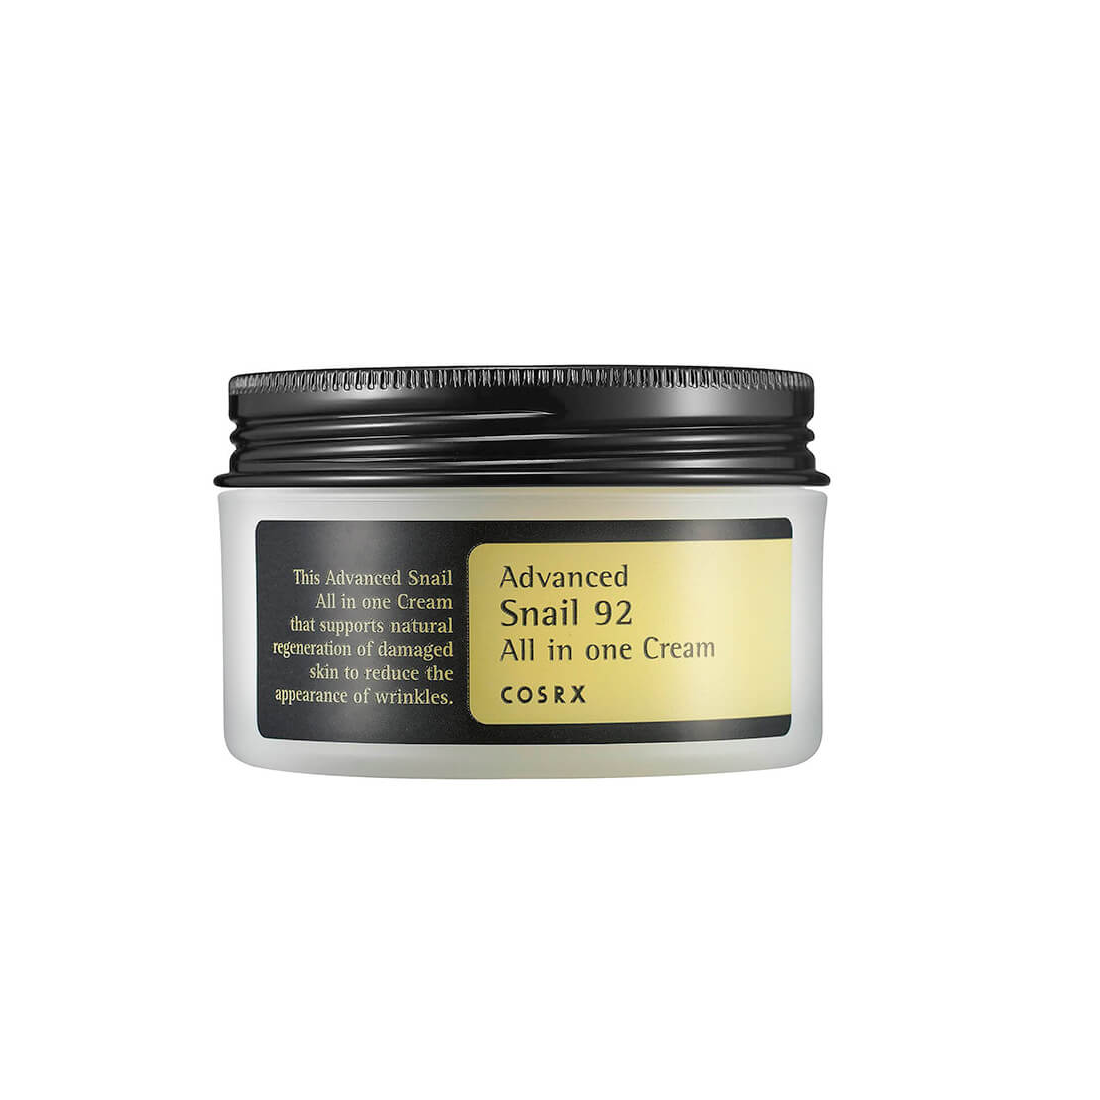 COSRX Advanced Snail 92 All In One Cream 100ml - K-SKIN BOUTIQUE authentic korean skincare toronto ottawa calgary montreal vancouver canada natural organic vegan cruelty-free cosmetics kbeauty free shipping clean beauty skin routine makeup